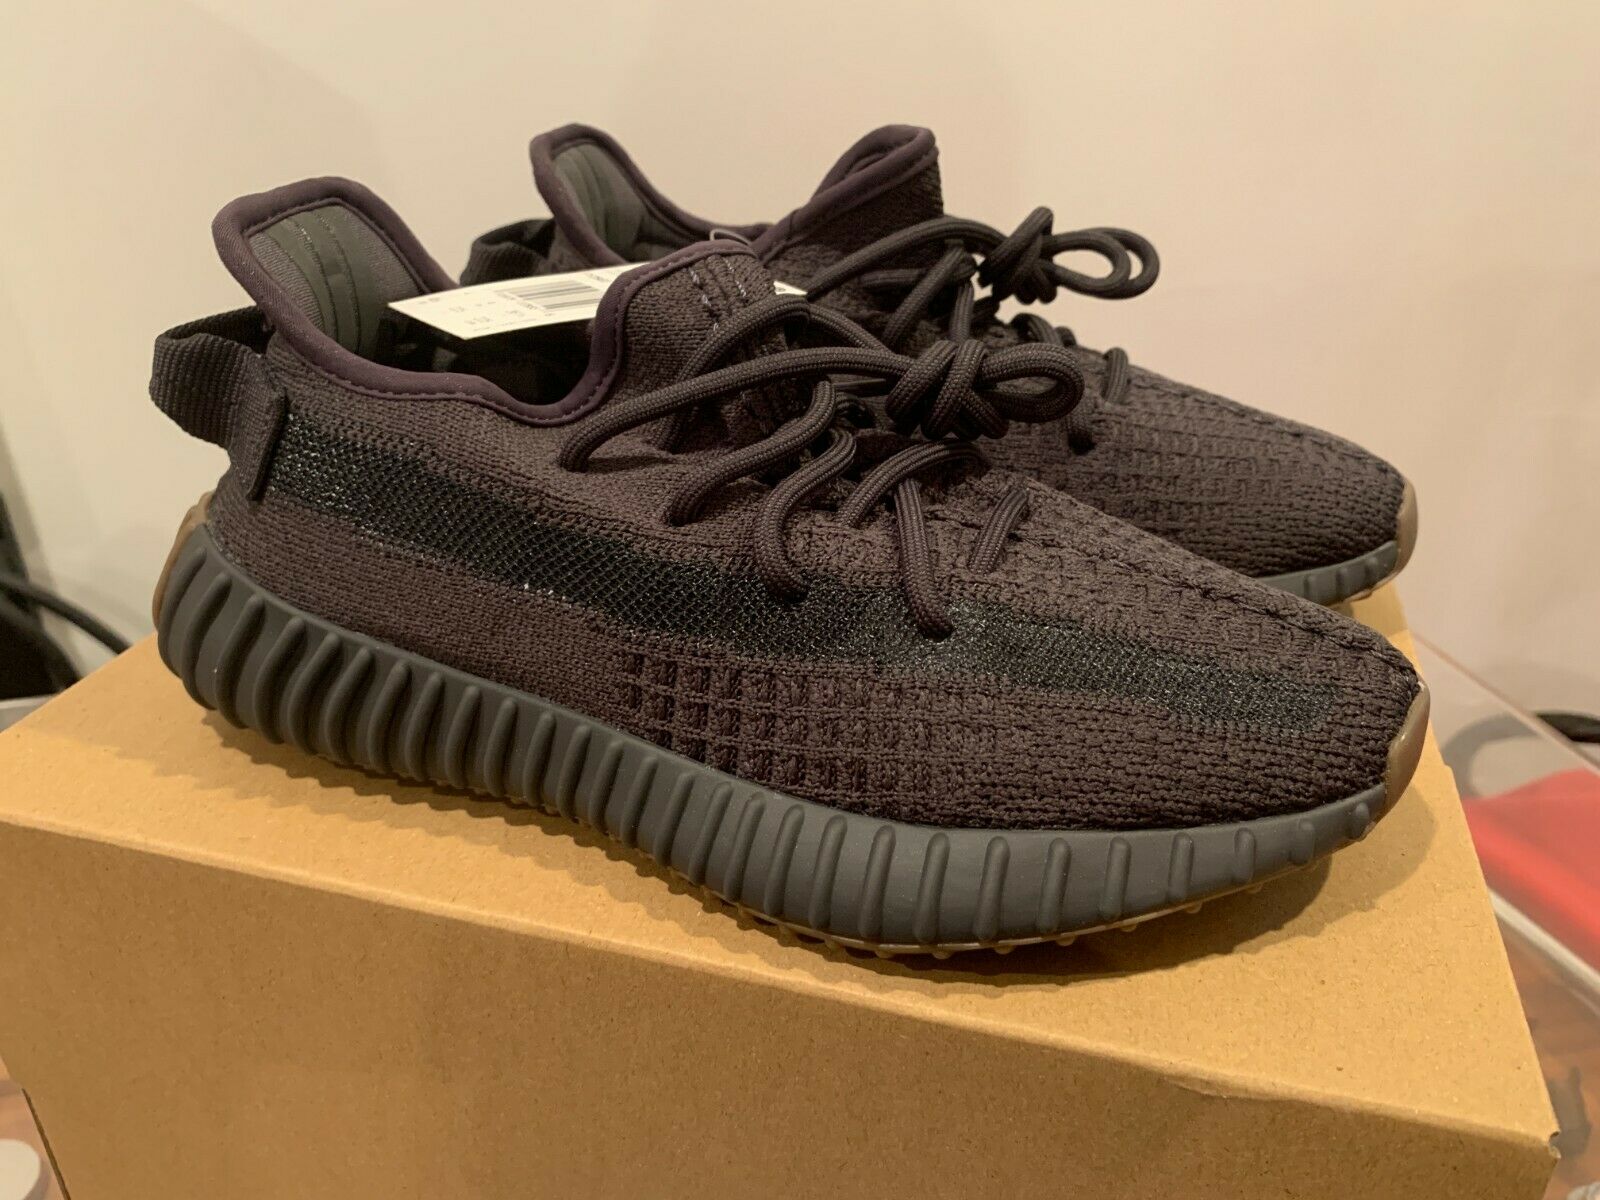 NEW Adidas Yeezy Boost 350 V2 Size 4.5 Cinder Shoes Sneakers Men Women Black